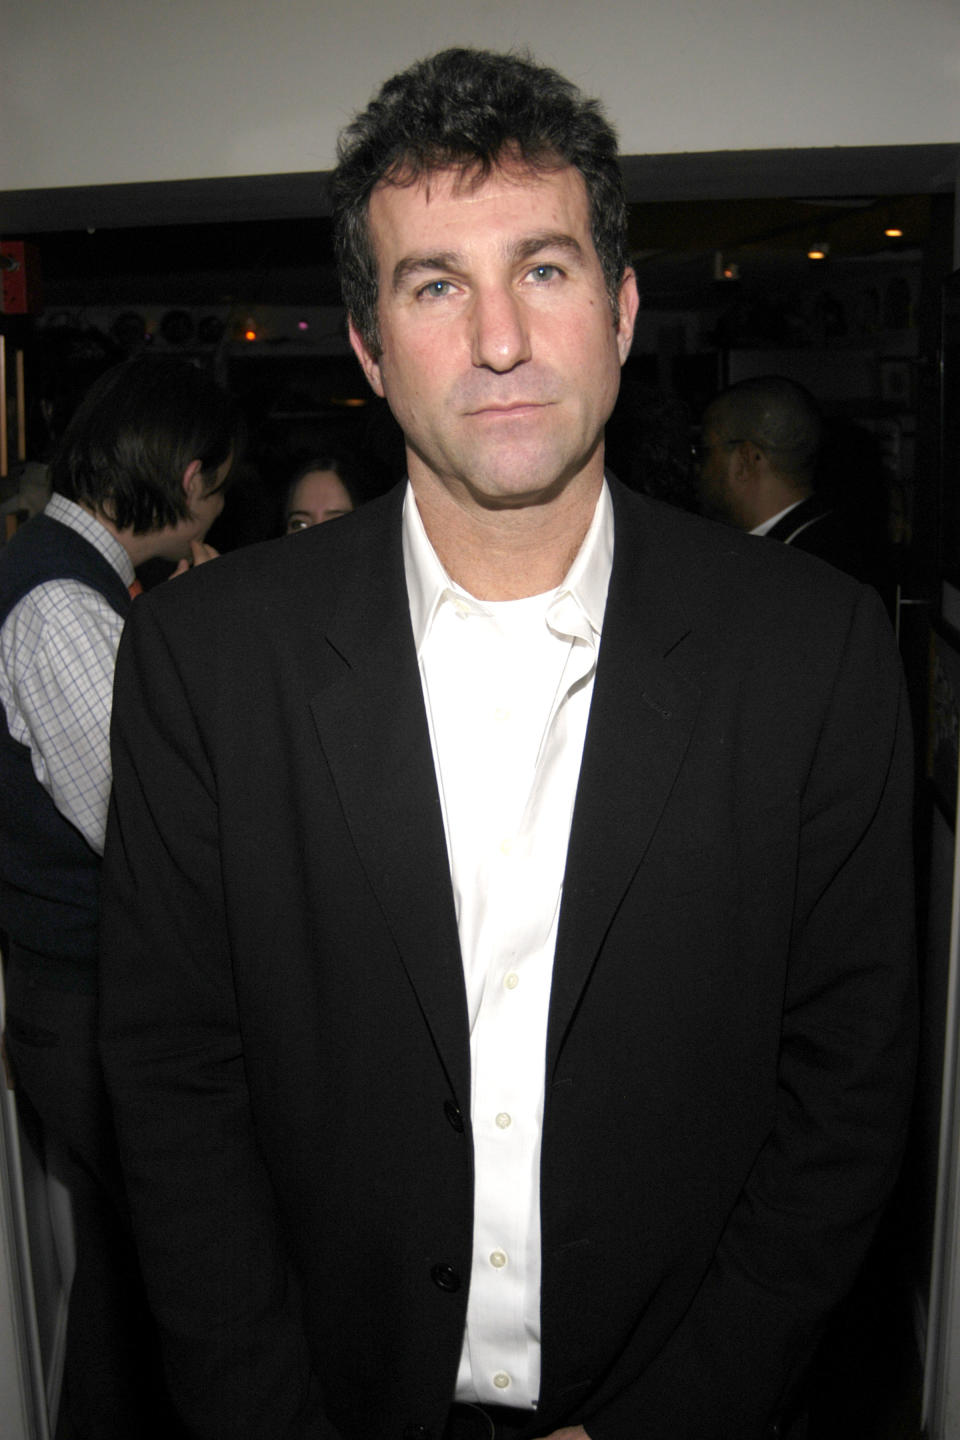 Ken Friedman attends New York Magazines 3rd Annual Oscar Viewing Party at The Spotted Pig on February 24, 2008 in New York City.